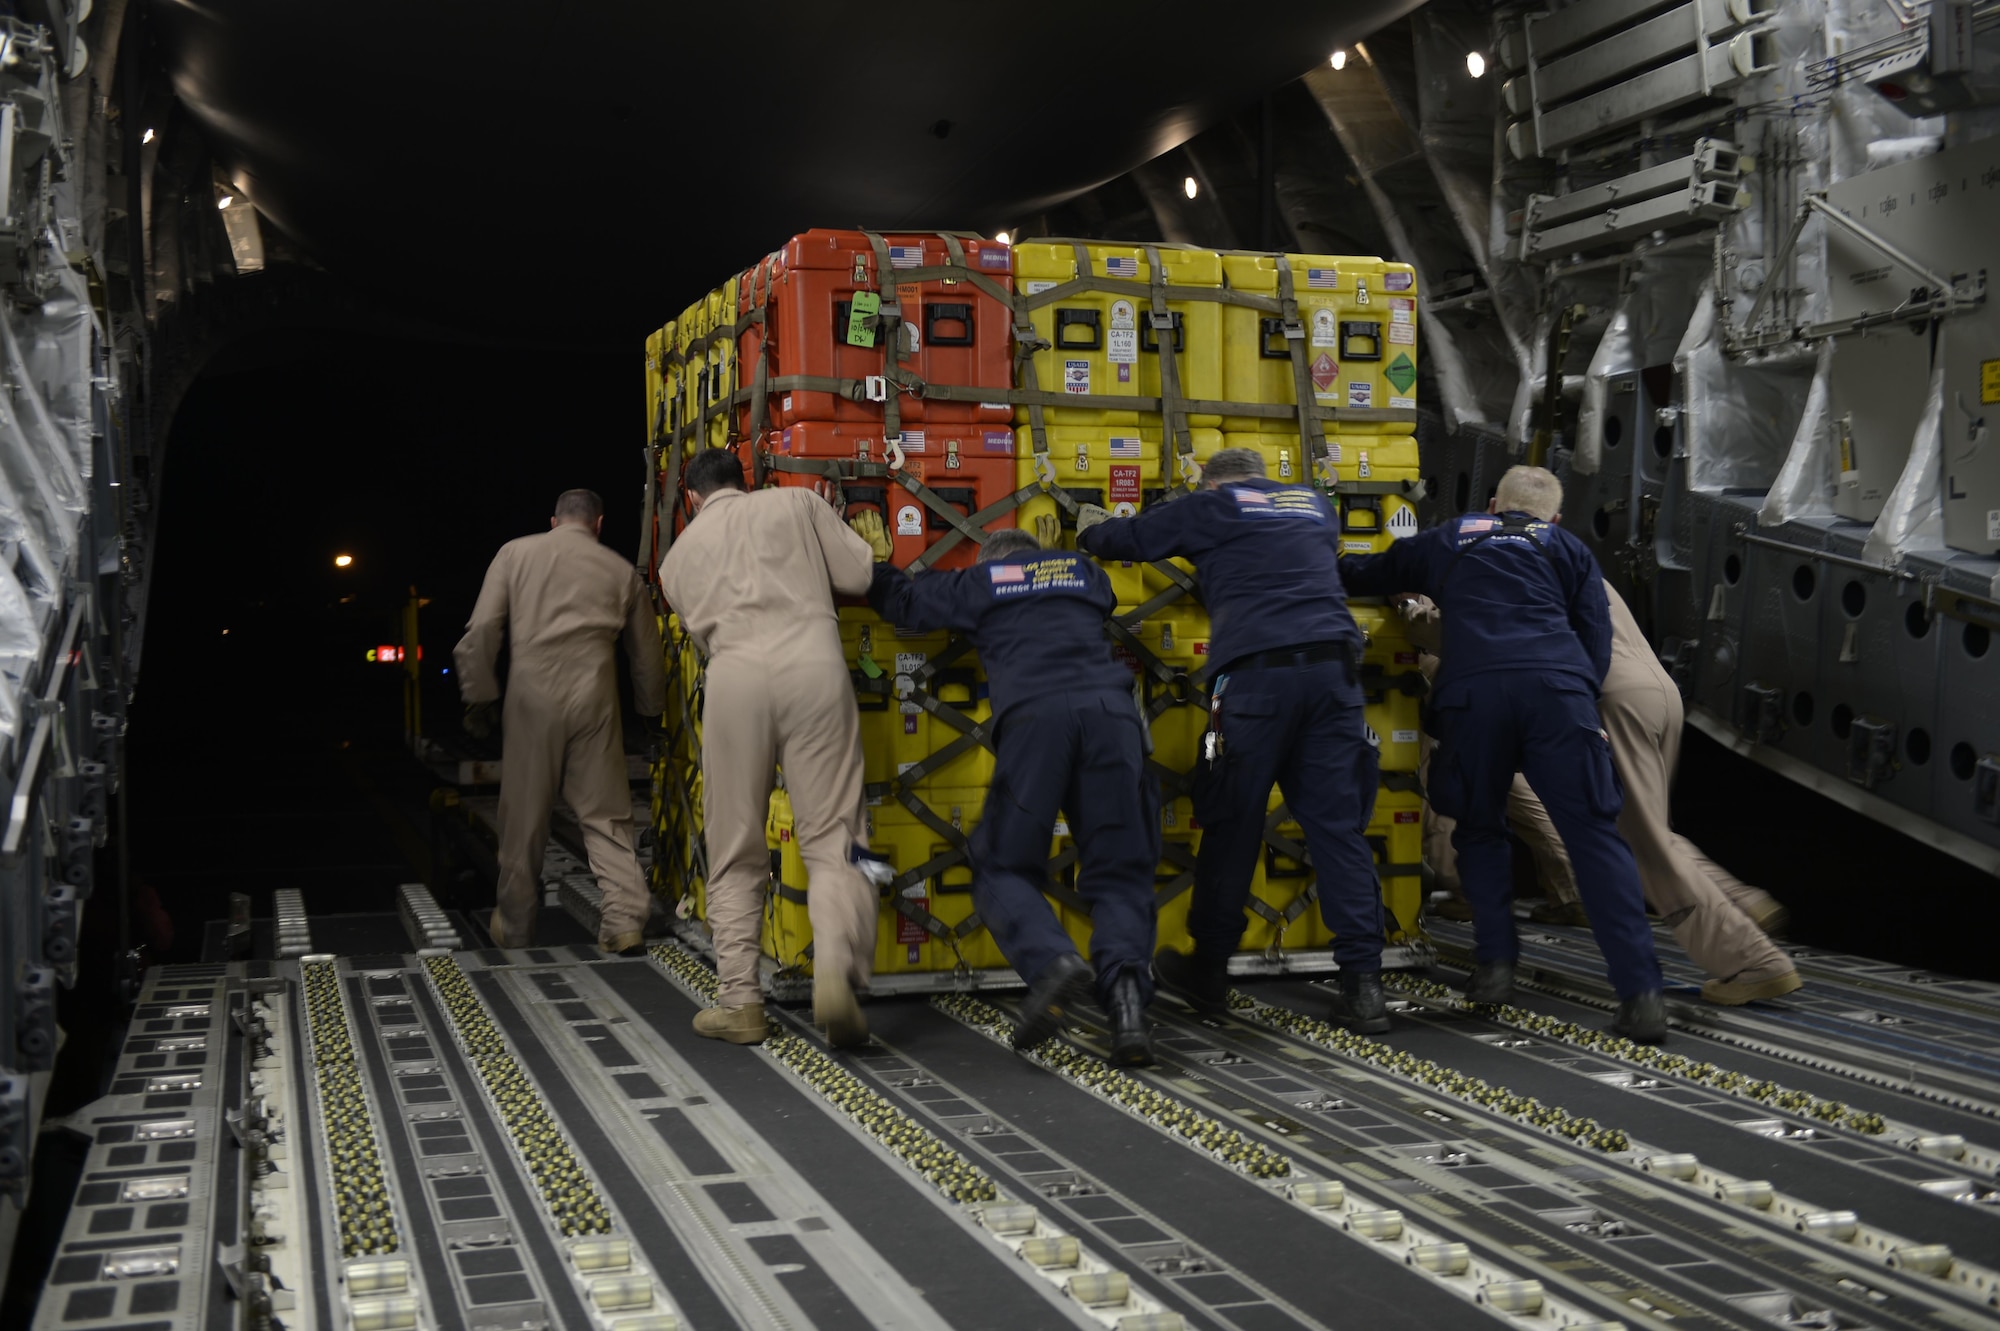 U.S. Air Force Airmen and members of the United States Agency to International Development (USAID) and Los Angeles County Search and Rescue team offload relief supplies for victims of the earthquake in Katmandu, Nepal, April 28, 2015. The Air Force transported relief supplies along with members of the United States Agency to International Development (USAID), the Los Angeles County Search and Rescue team and five search and rescue dogs to provide assistance to the men and women in Nepal. (U.S. Air Force photo/Airman 1st Class Taylor Queen)